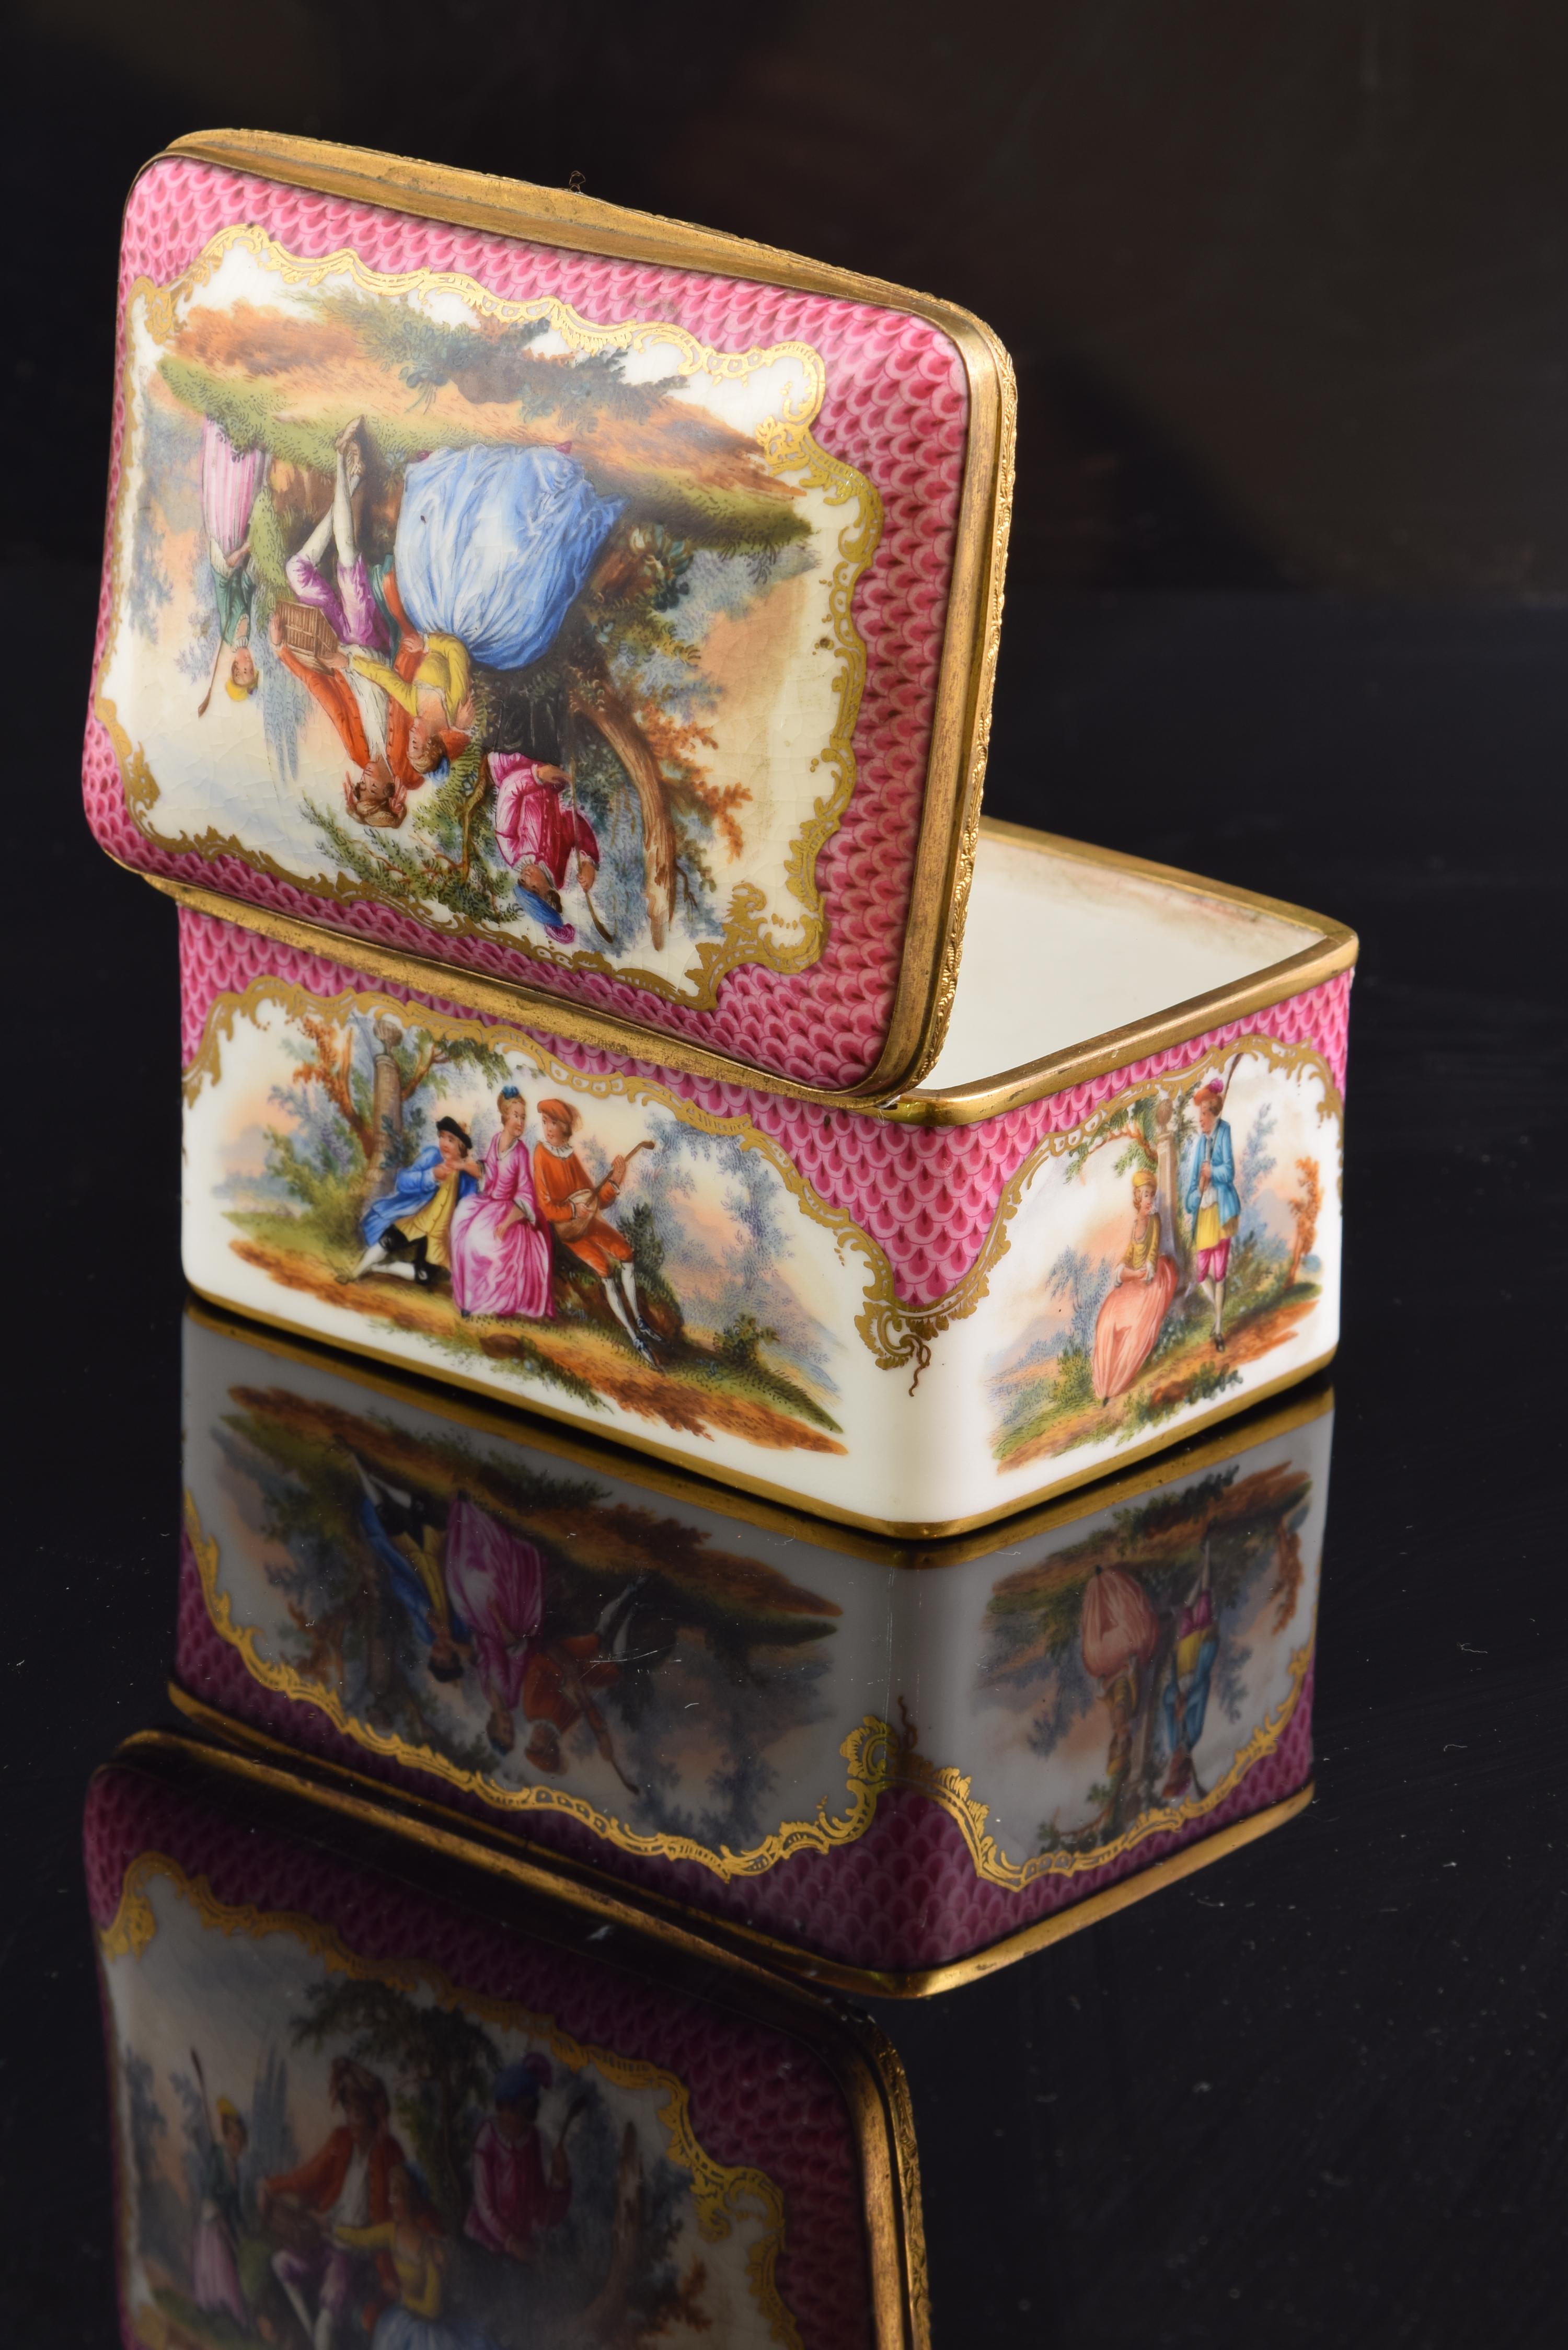 Neoclassical Revival Porcelain Box, Potschappel-Dresden, Germany, 19th Century, with Brand Mark For Sale